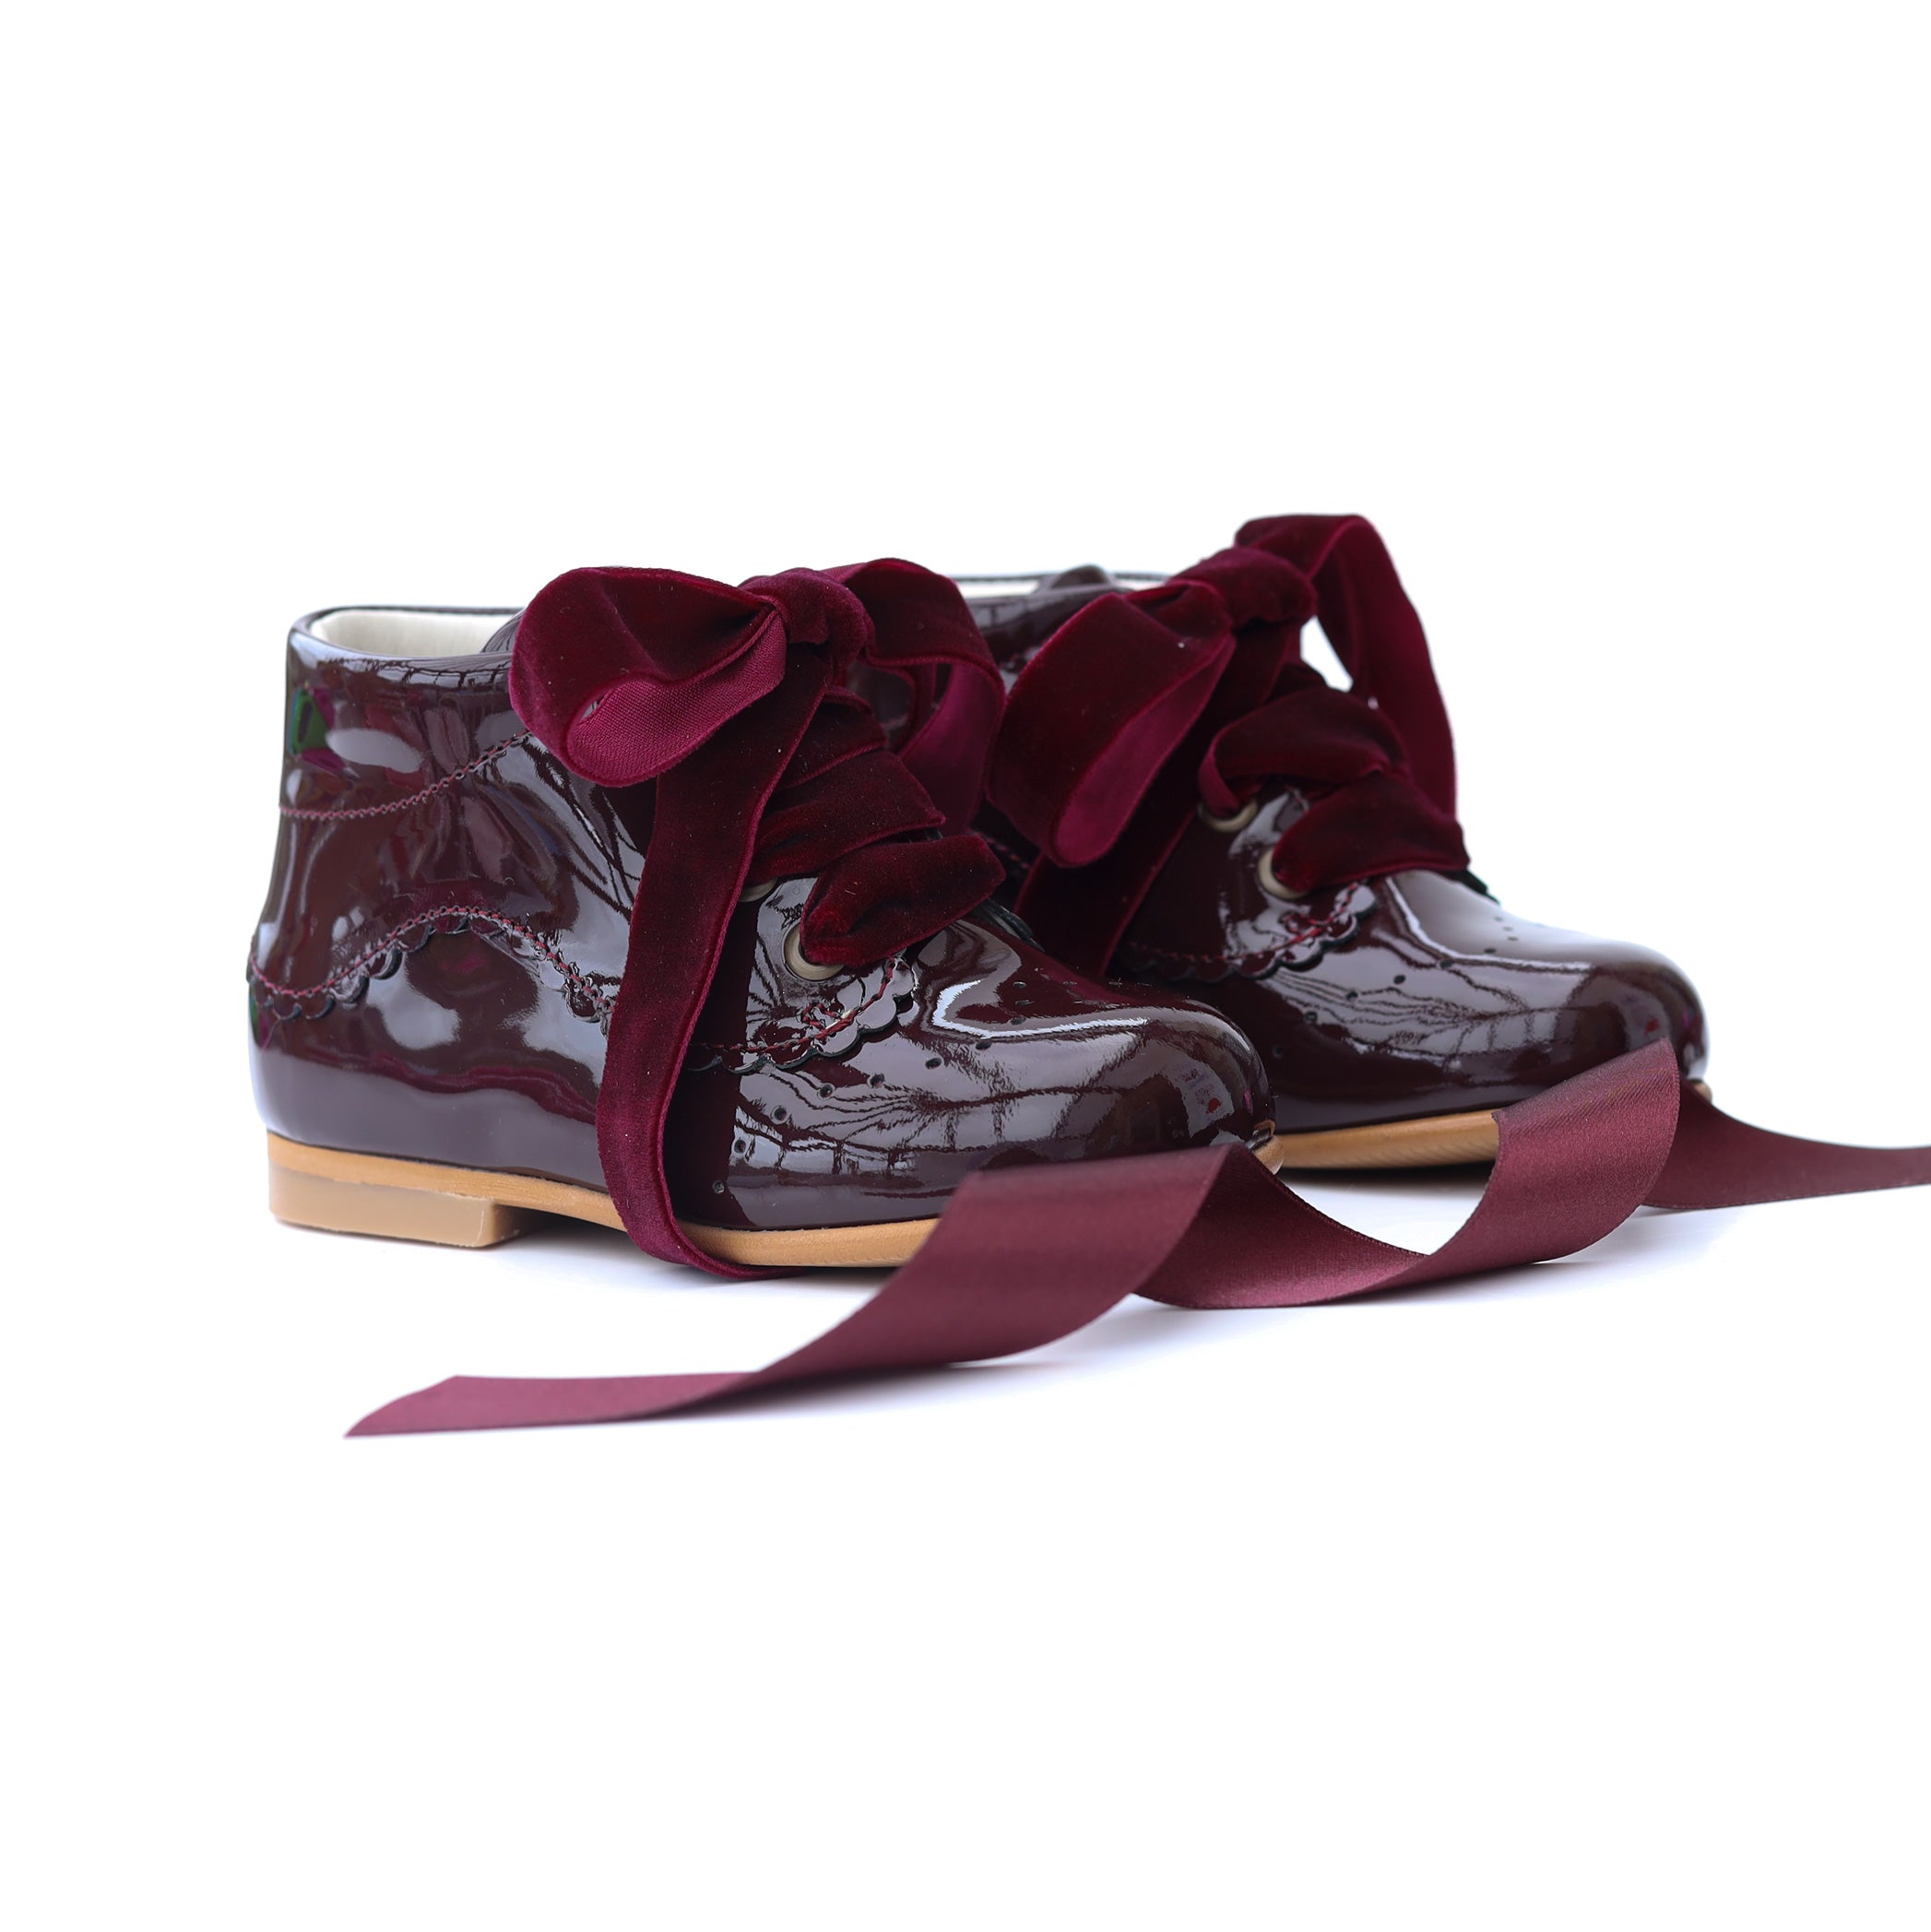 burgundy patent leather girls boots